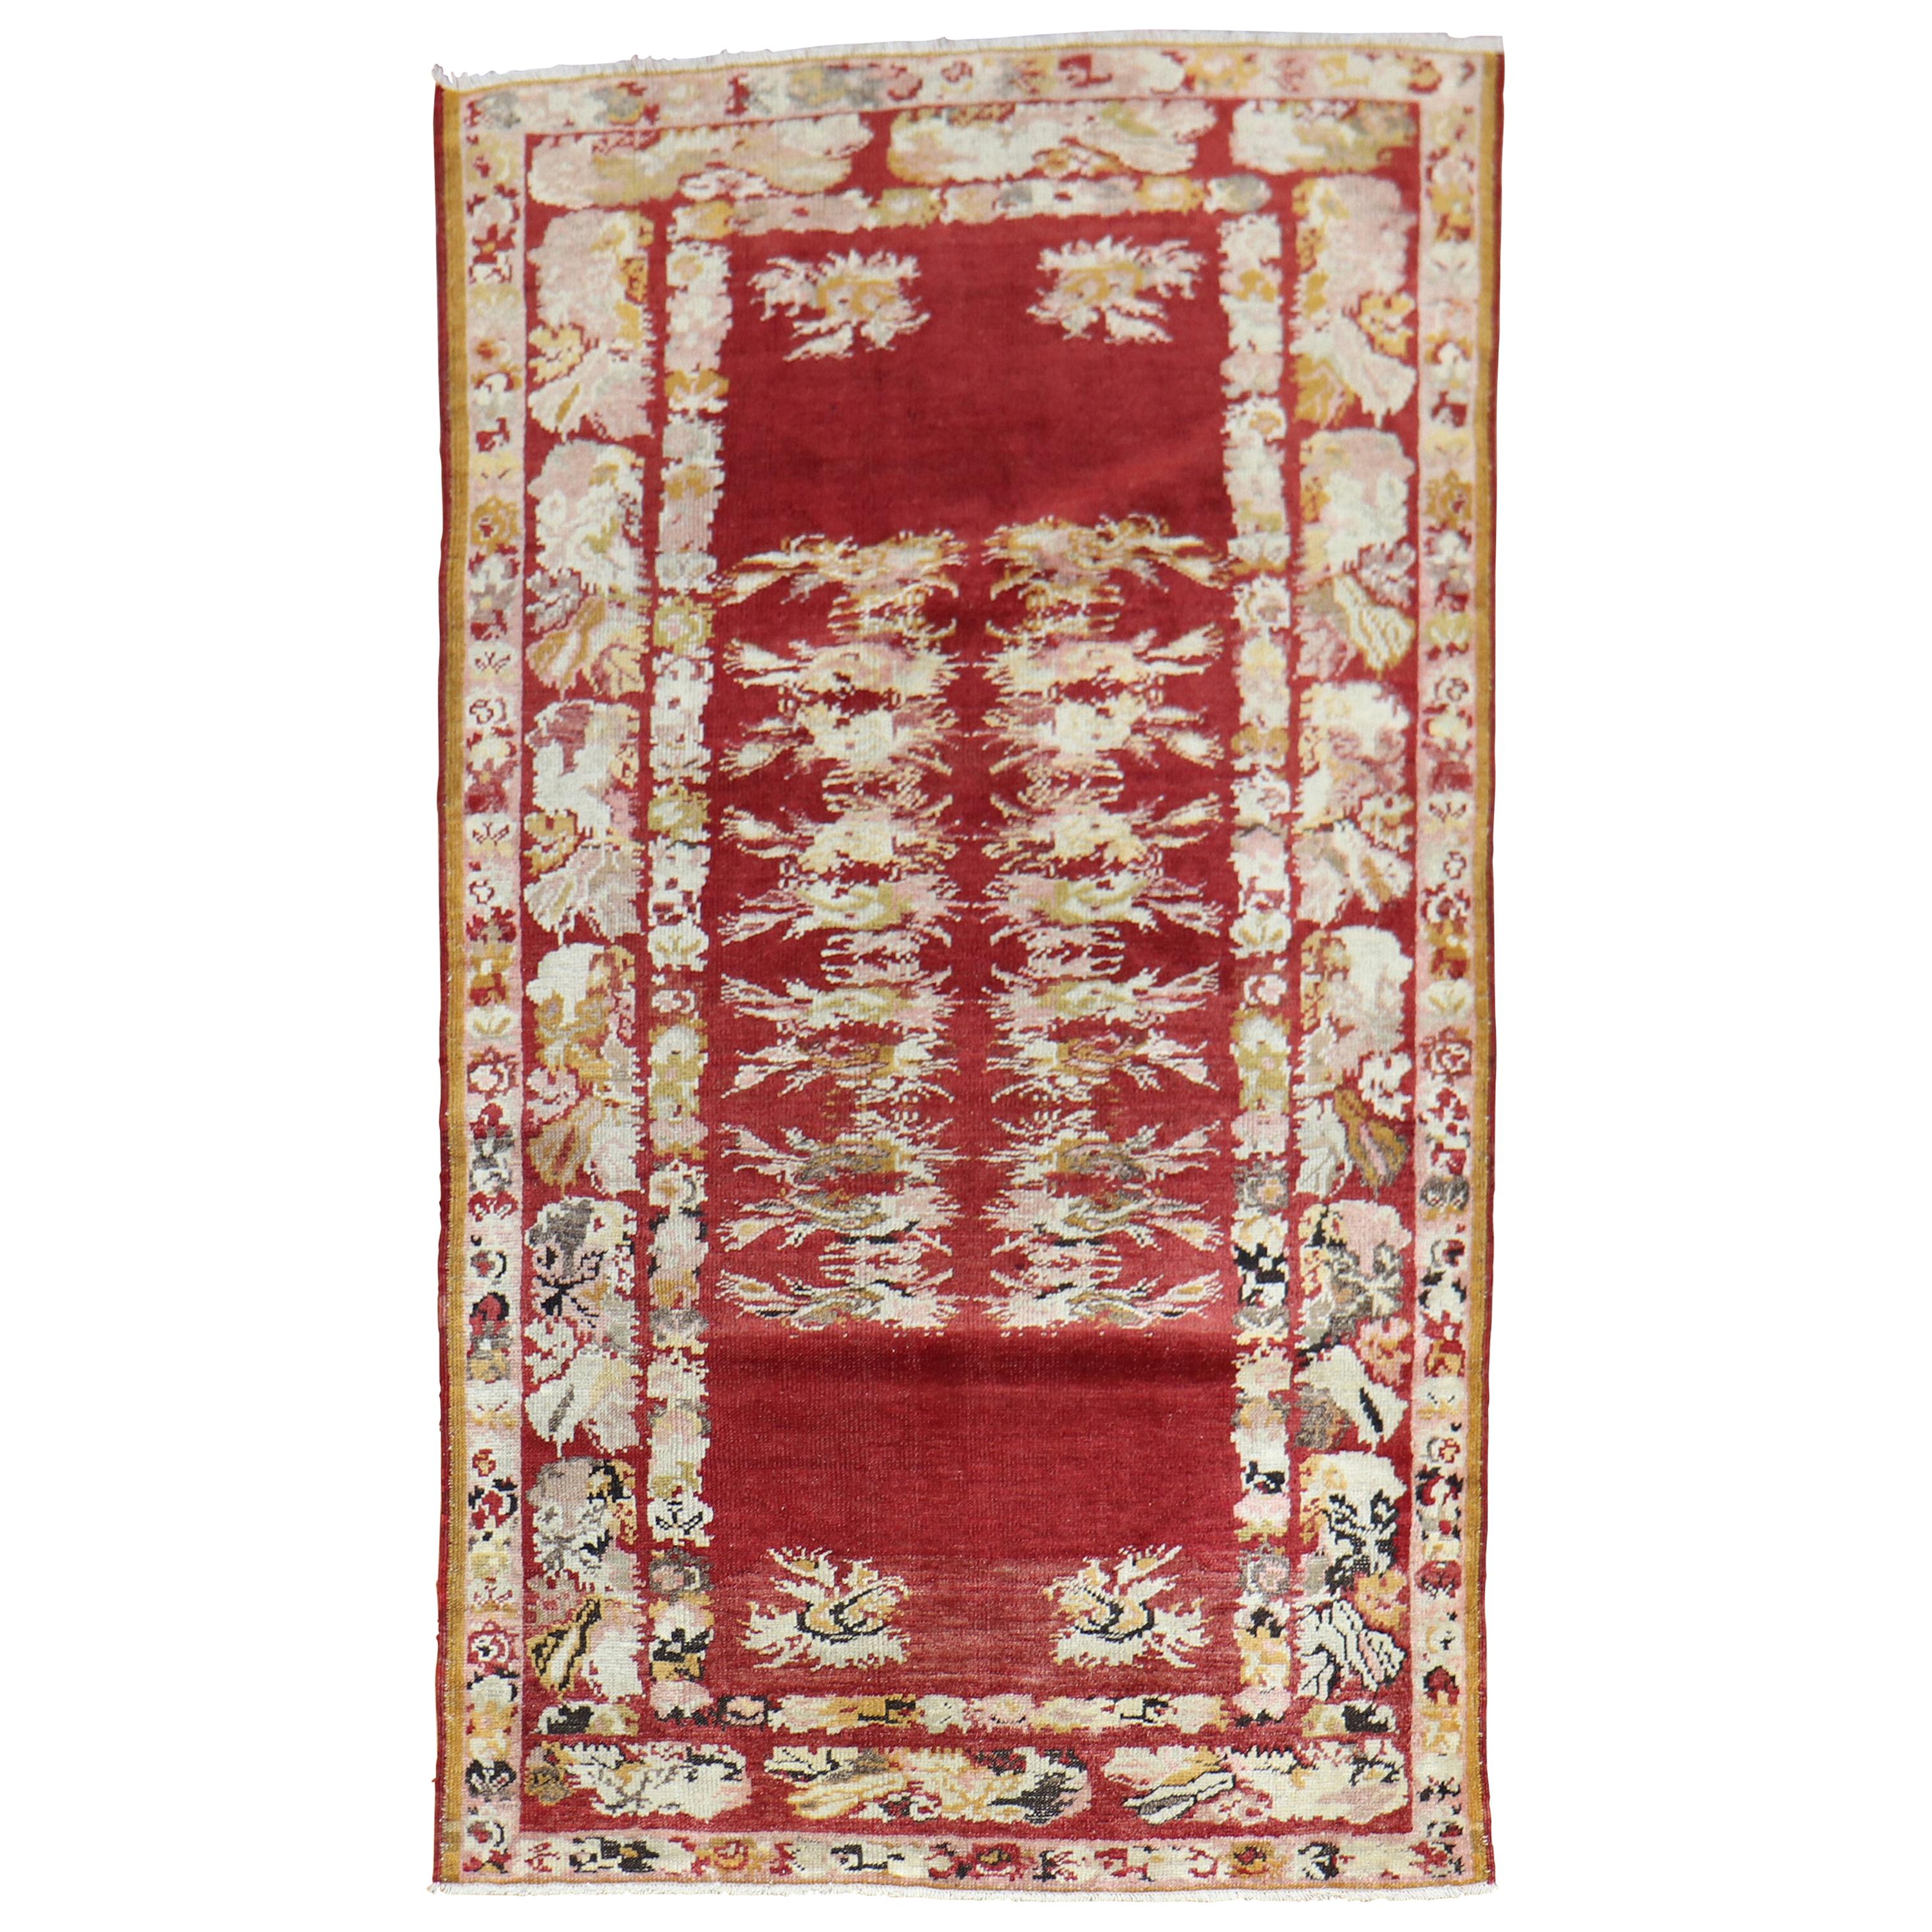 Cherry Red Antique Turkish Melas Rug, Early 20th Century For Sale